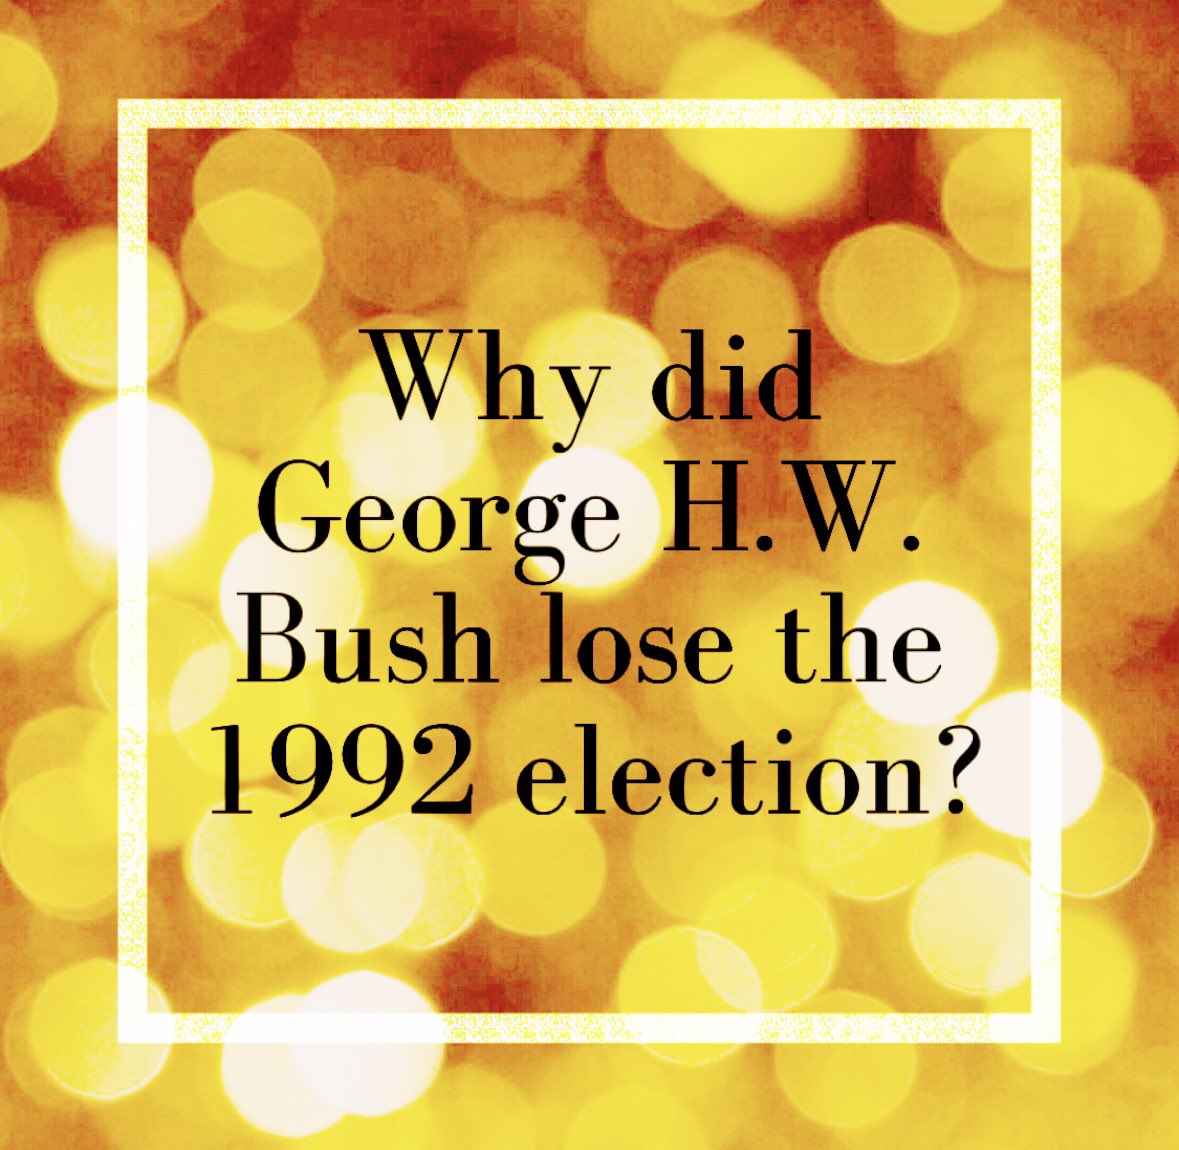 Chapter 26 listed multiple factors contributing to George Bush’s loss of the 1992 election. I want to know what factors stood out to you that led to Bush’s loss #themanwhoranwashington #peterbaker #susanglasser #jamesbaker #georgehwbush #billclinton #williamclinton #1992election